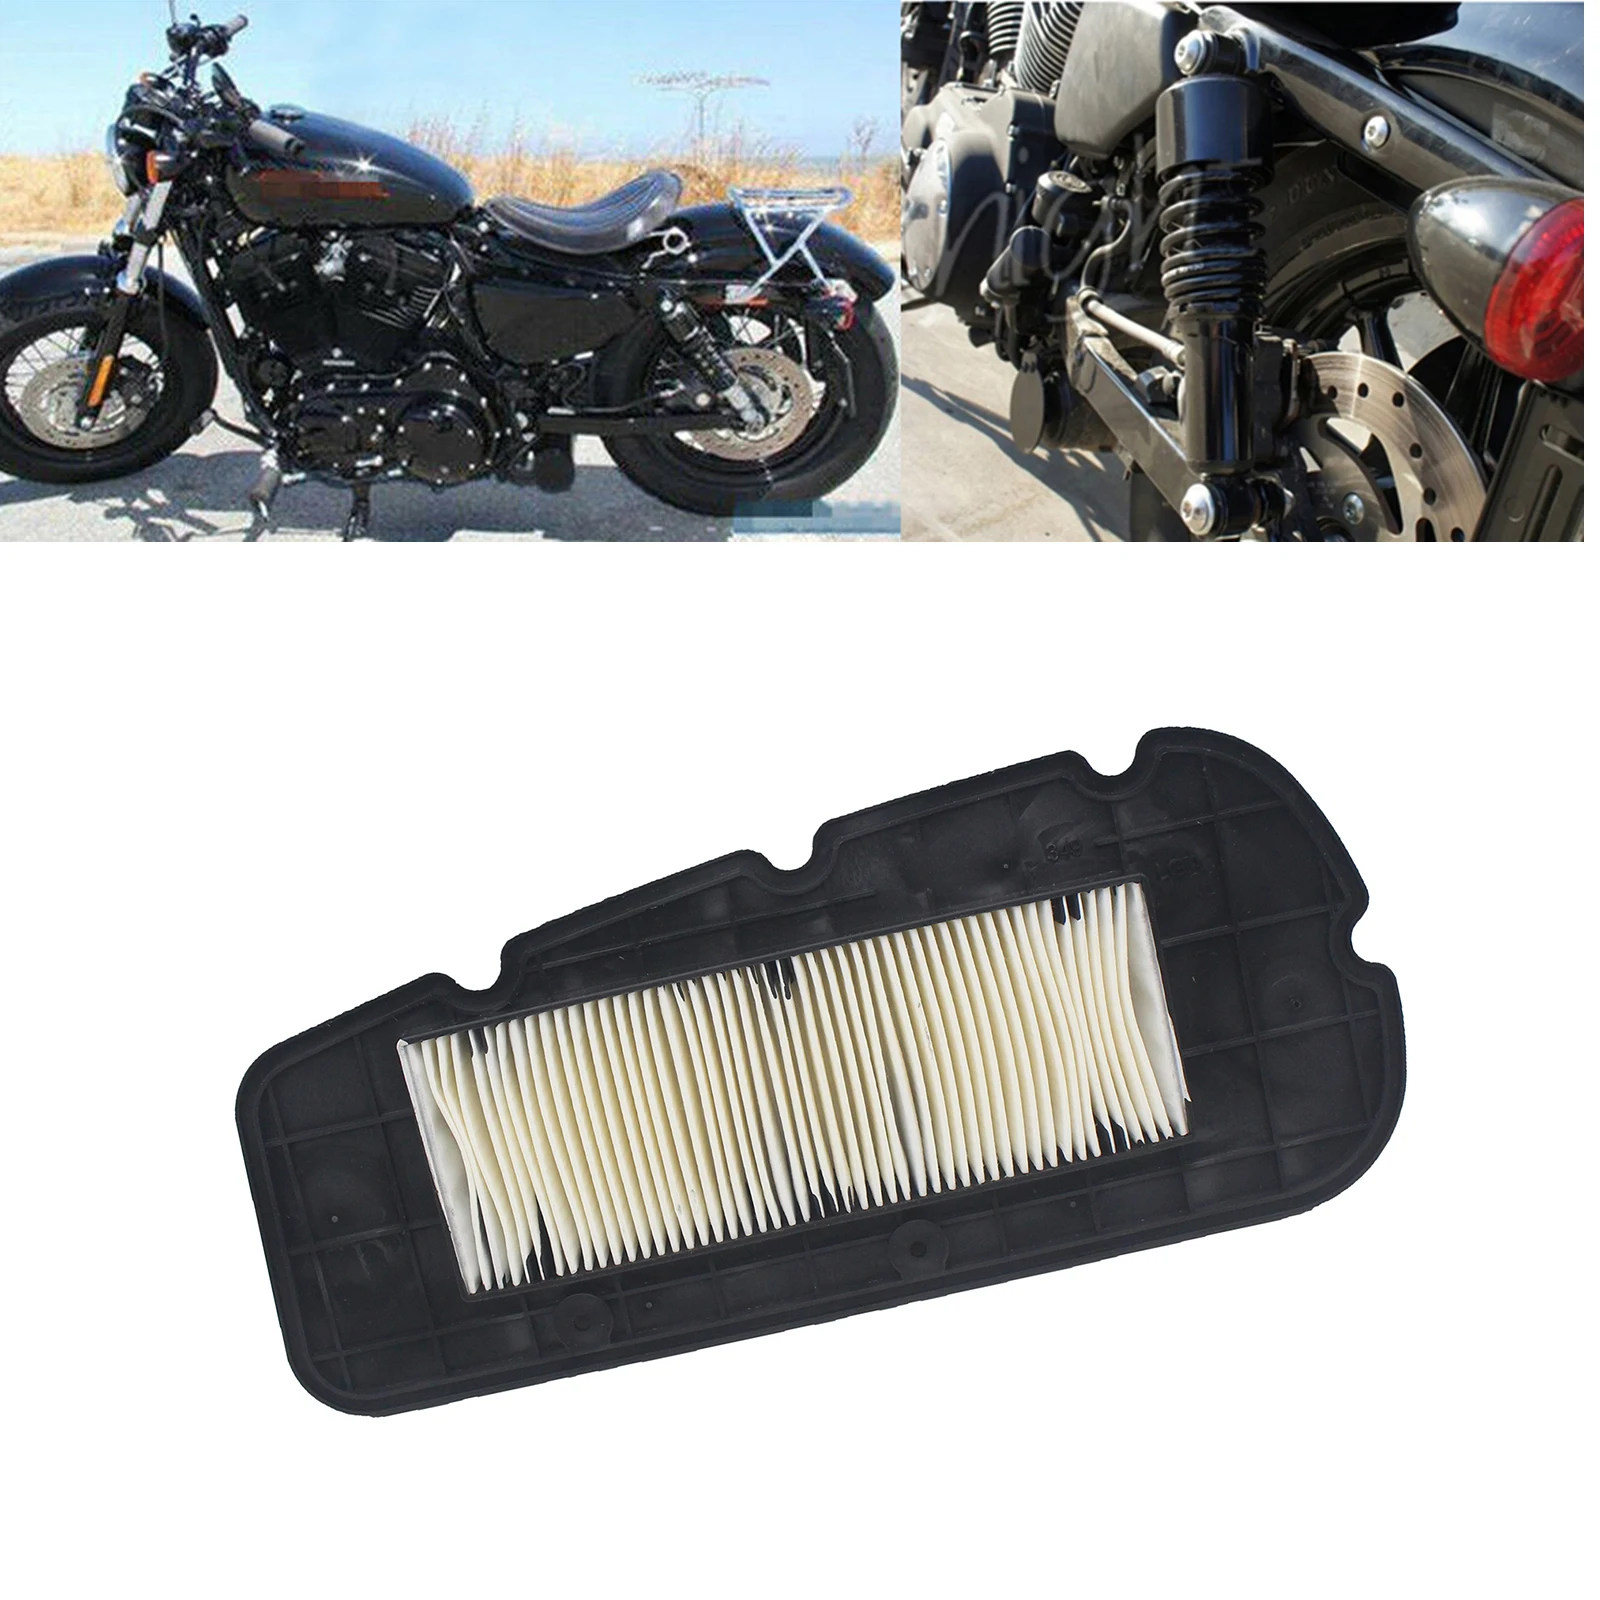 Air Filters Intake Cleaner Motorcycle Motorbike for SYM Scooter 300 Replace Supplies Professional Durable